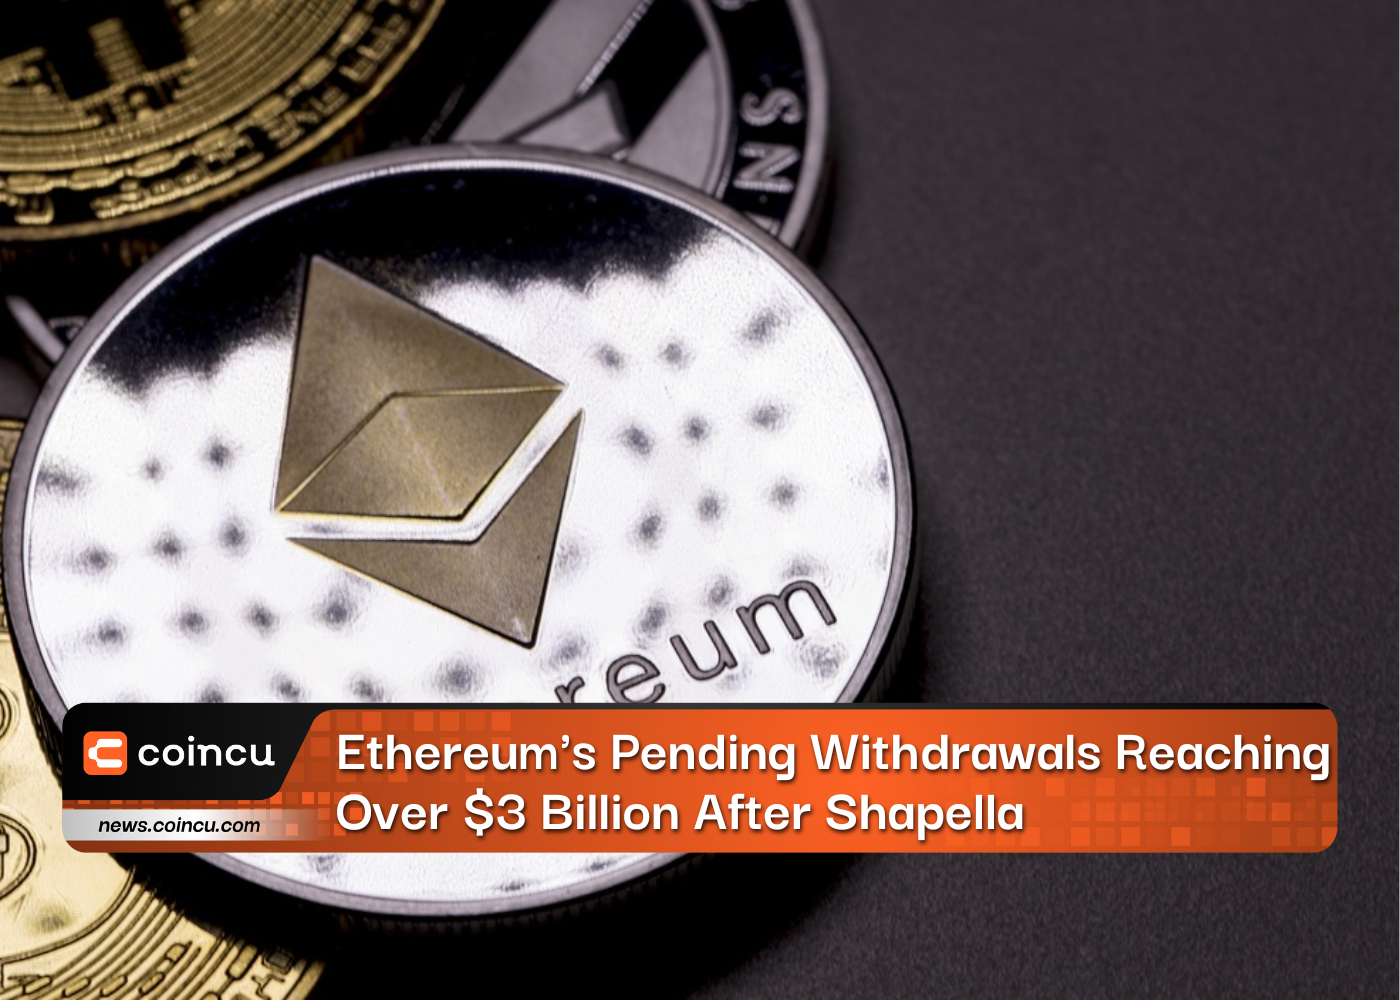 Ethereum's Pending Withdrawals Reaching Over $3 Billion After Shapella